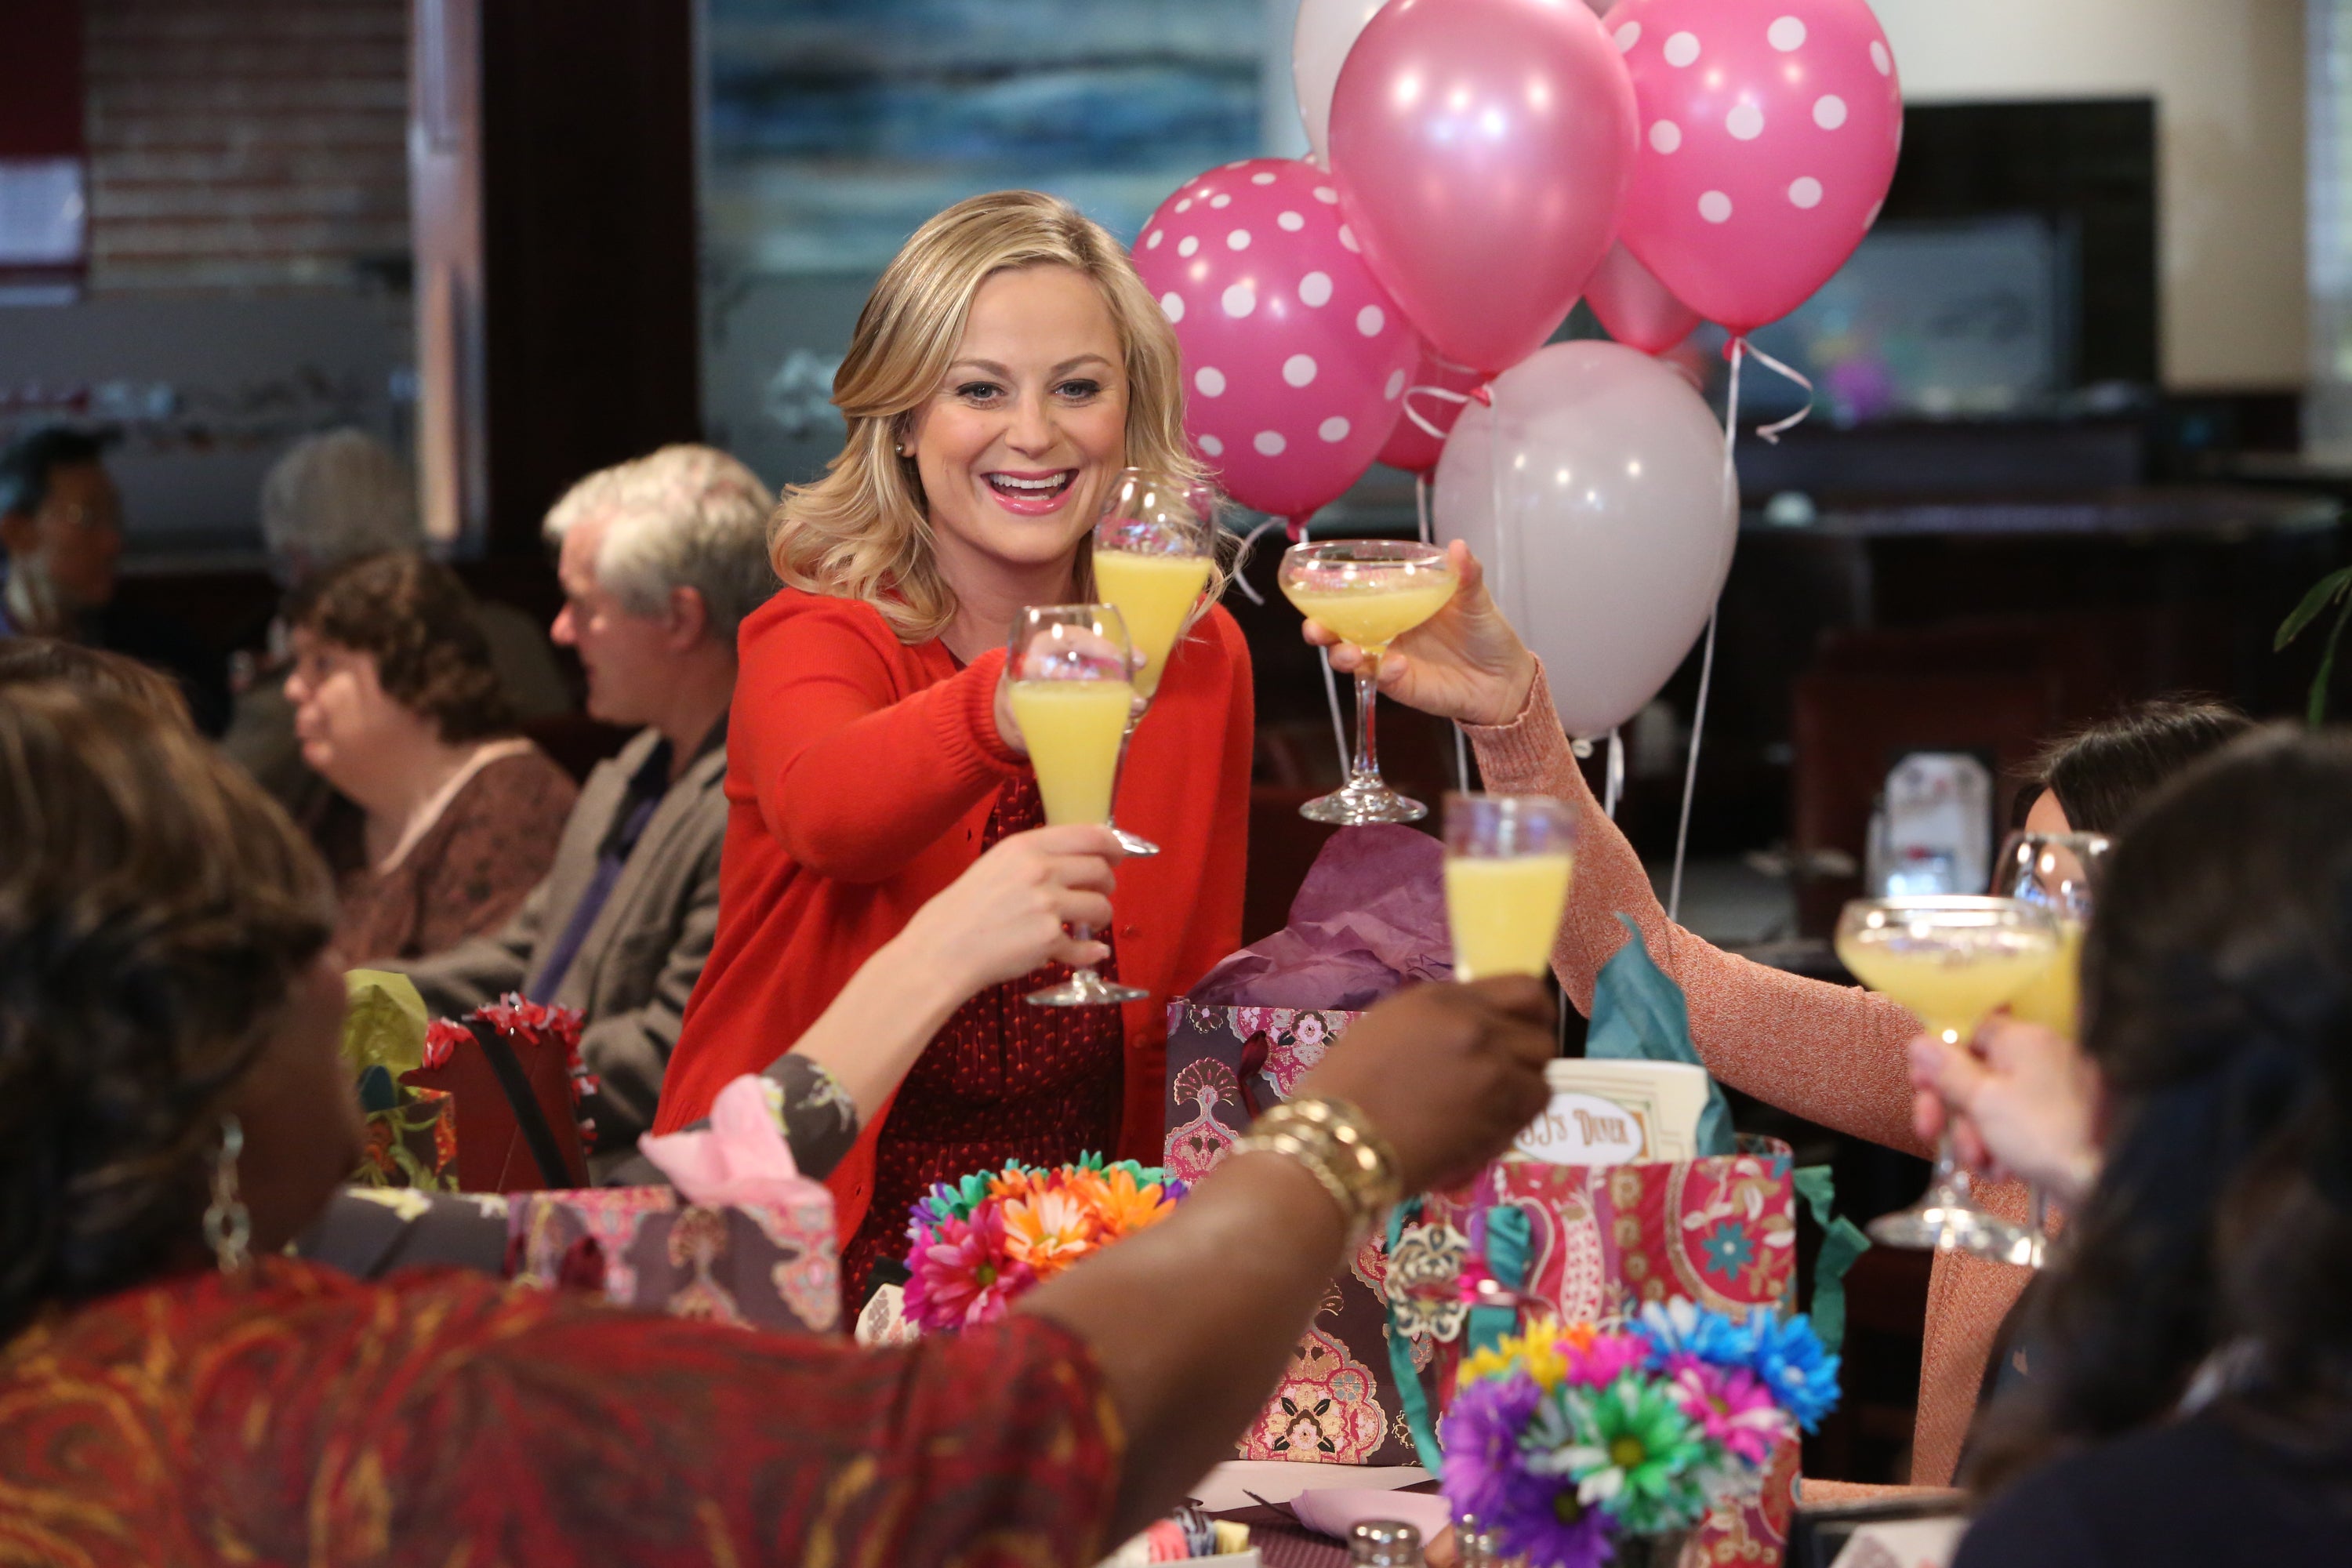 Friends first: Amy Poehler as Leslie Knope in ‘Parks and Recreation’